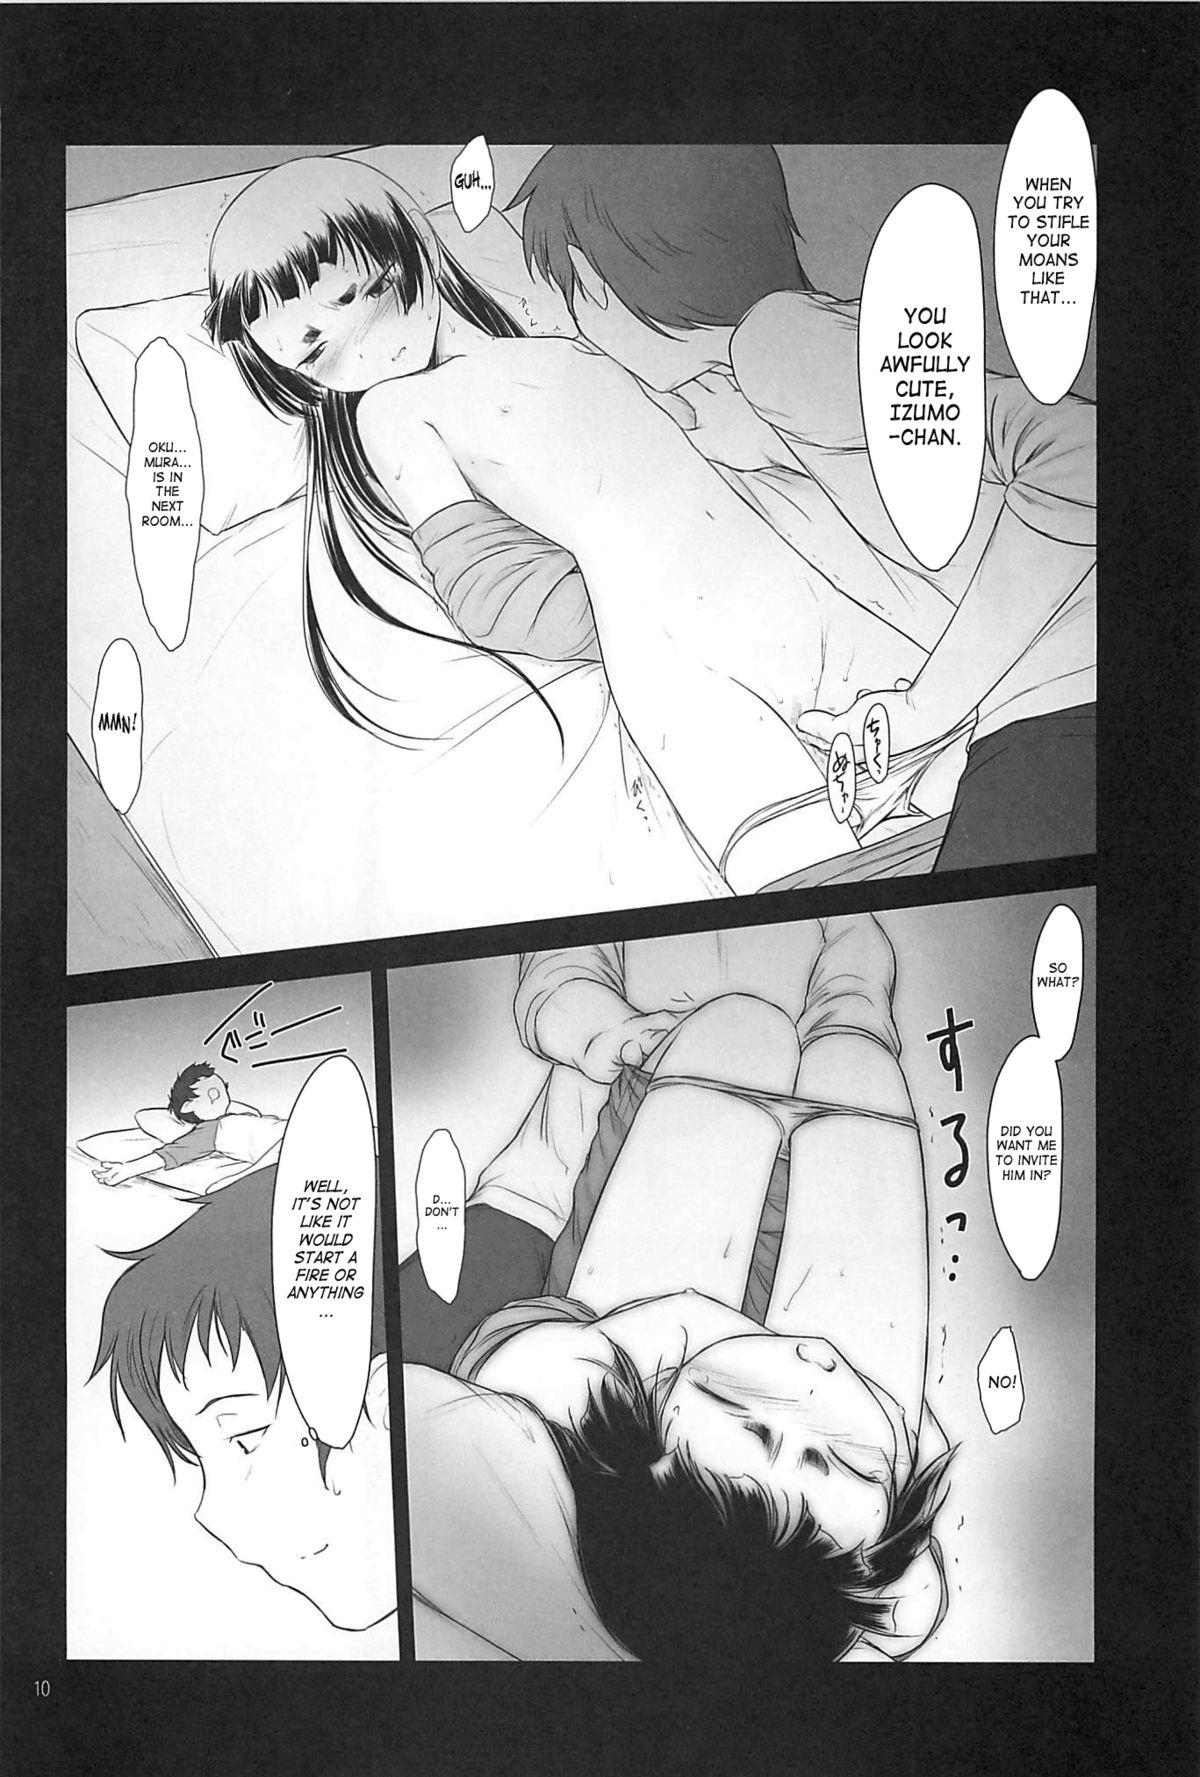 Pussy Eating Petite Soeur 10 - Ao no exorcist Latino - Page 9